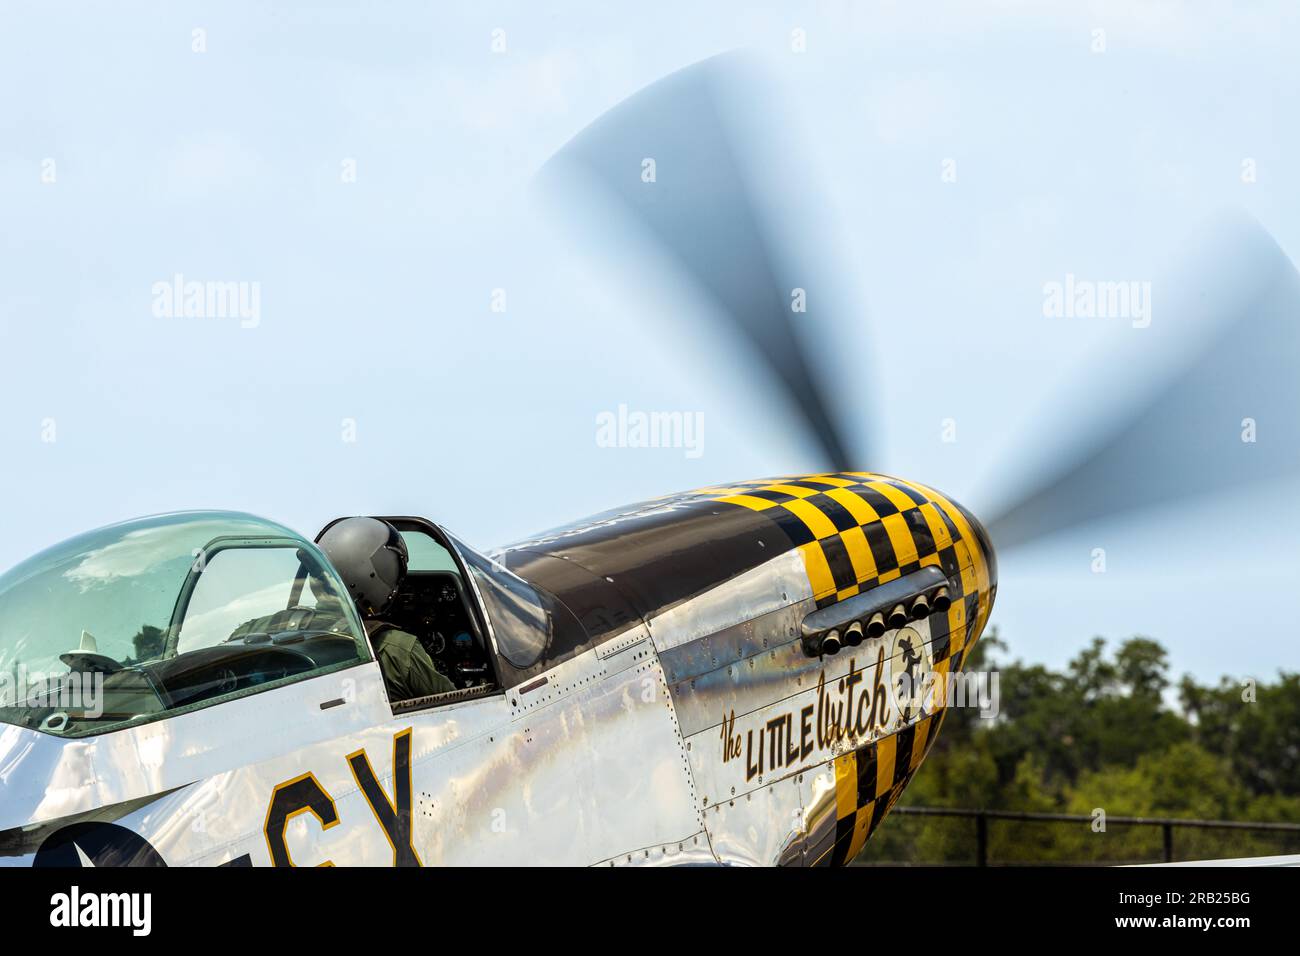 The Mustang getting ready for take off. Stock Photo